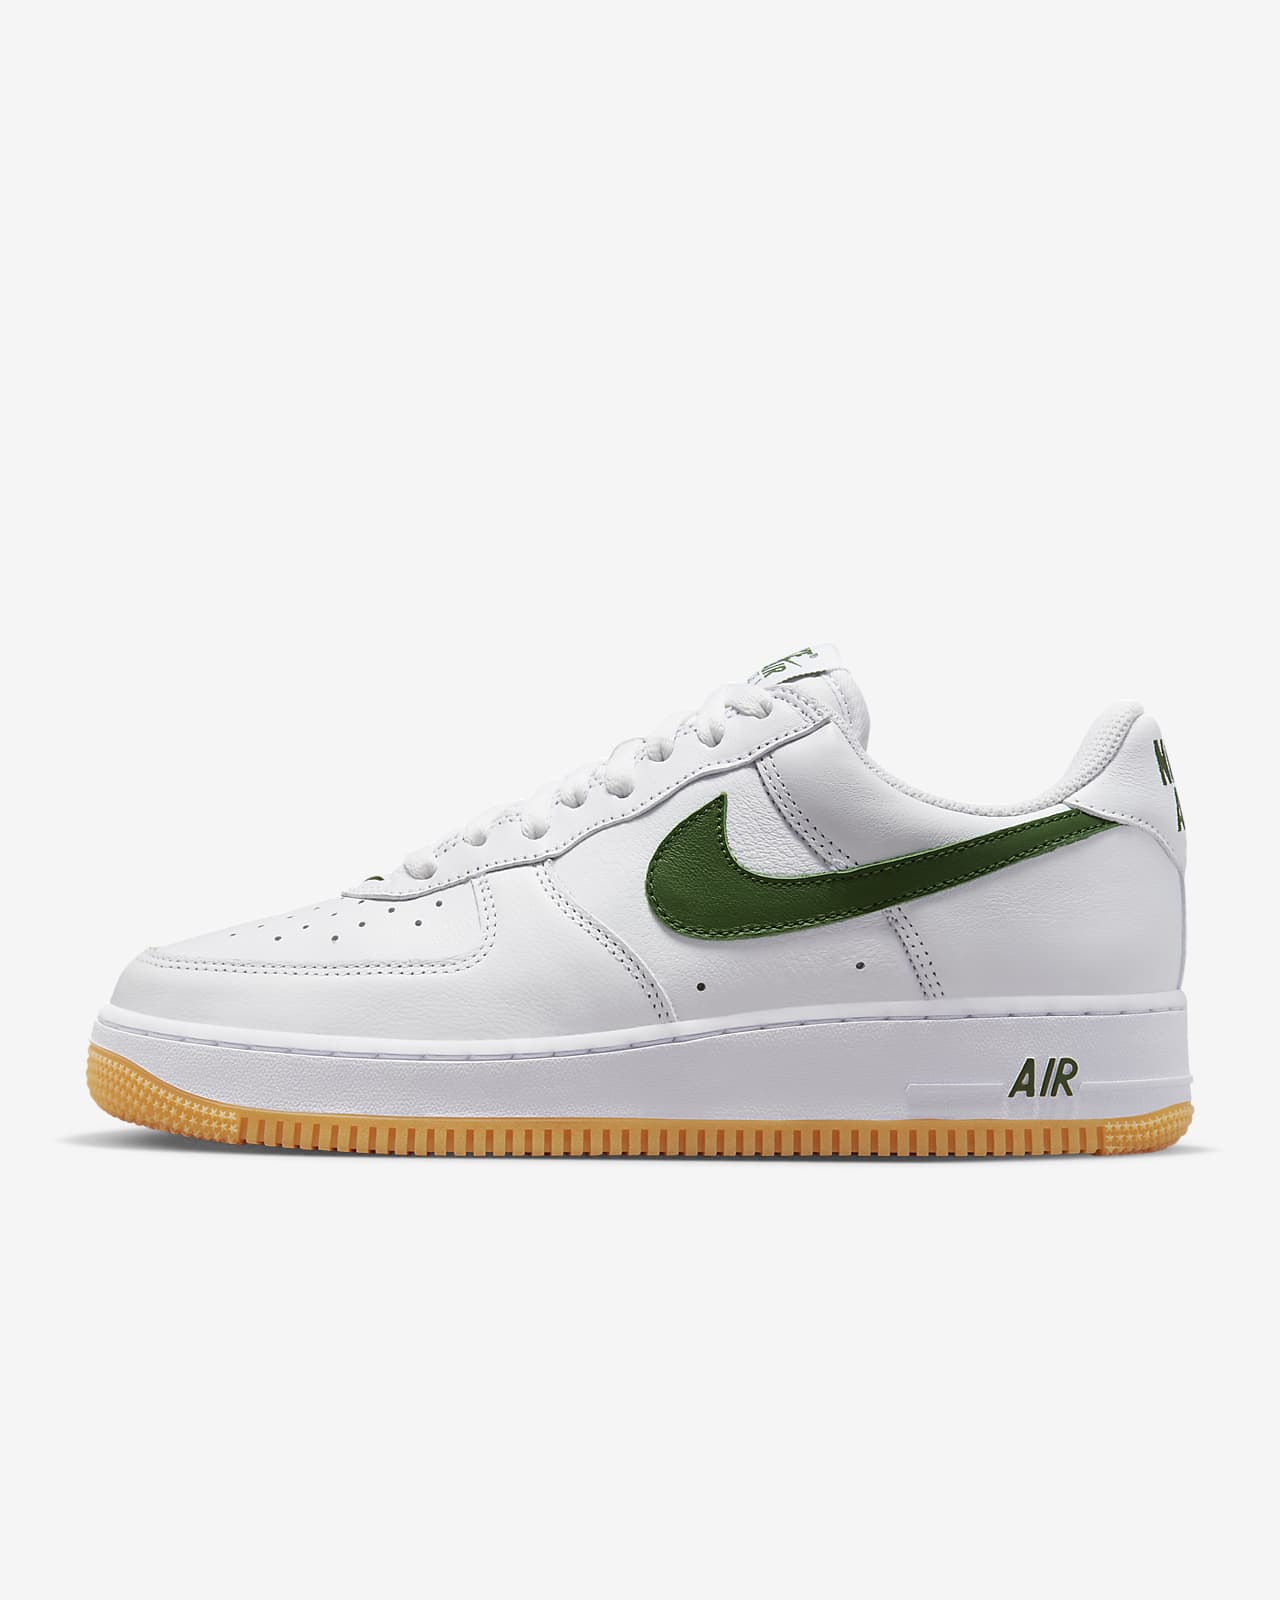 Nike Air Force 1 Low Retro Mens Shoes Review